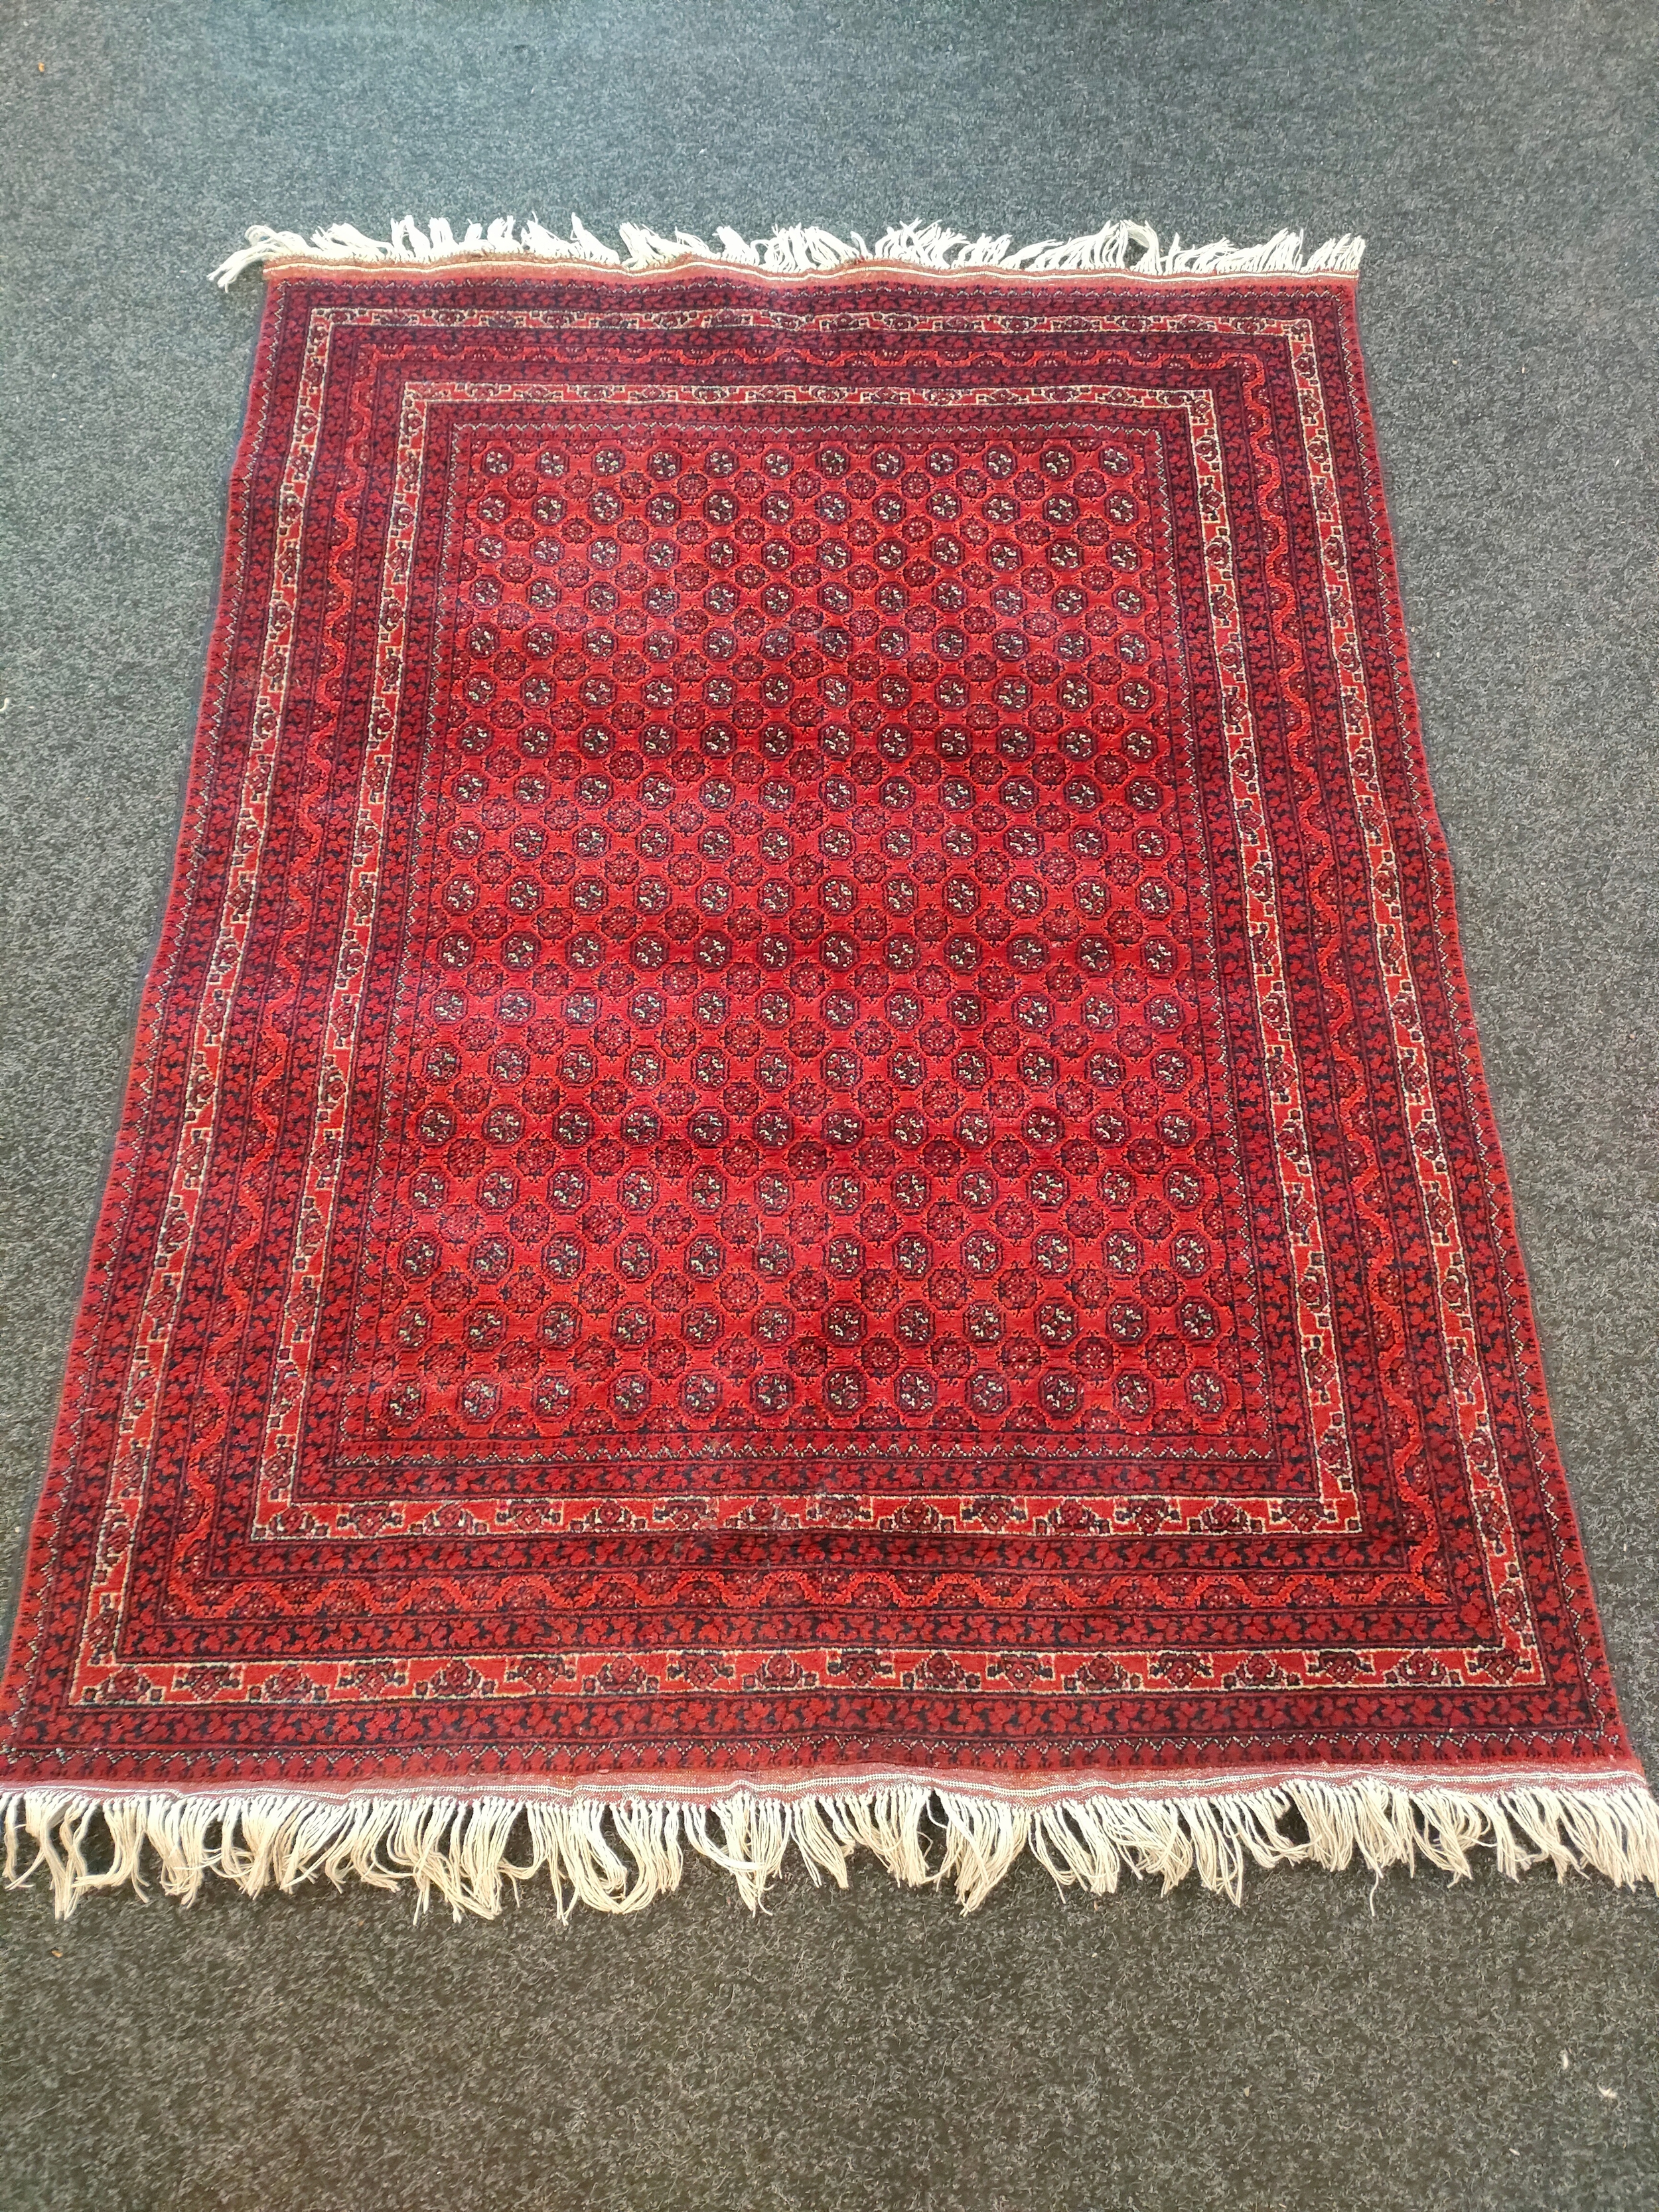 A Large Afghan hand woven red rug with shite trimming [201x154cm]